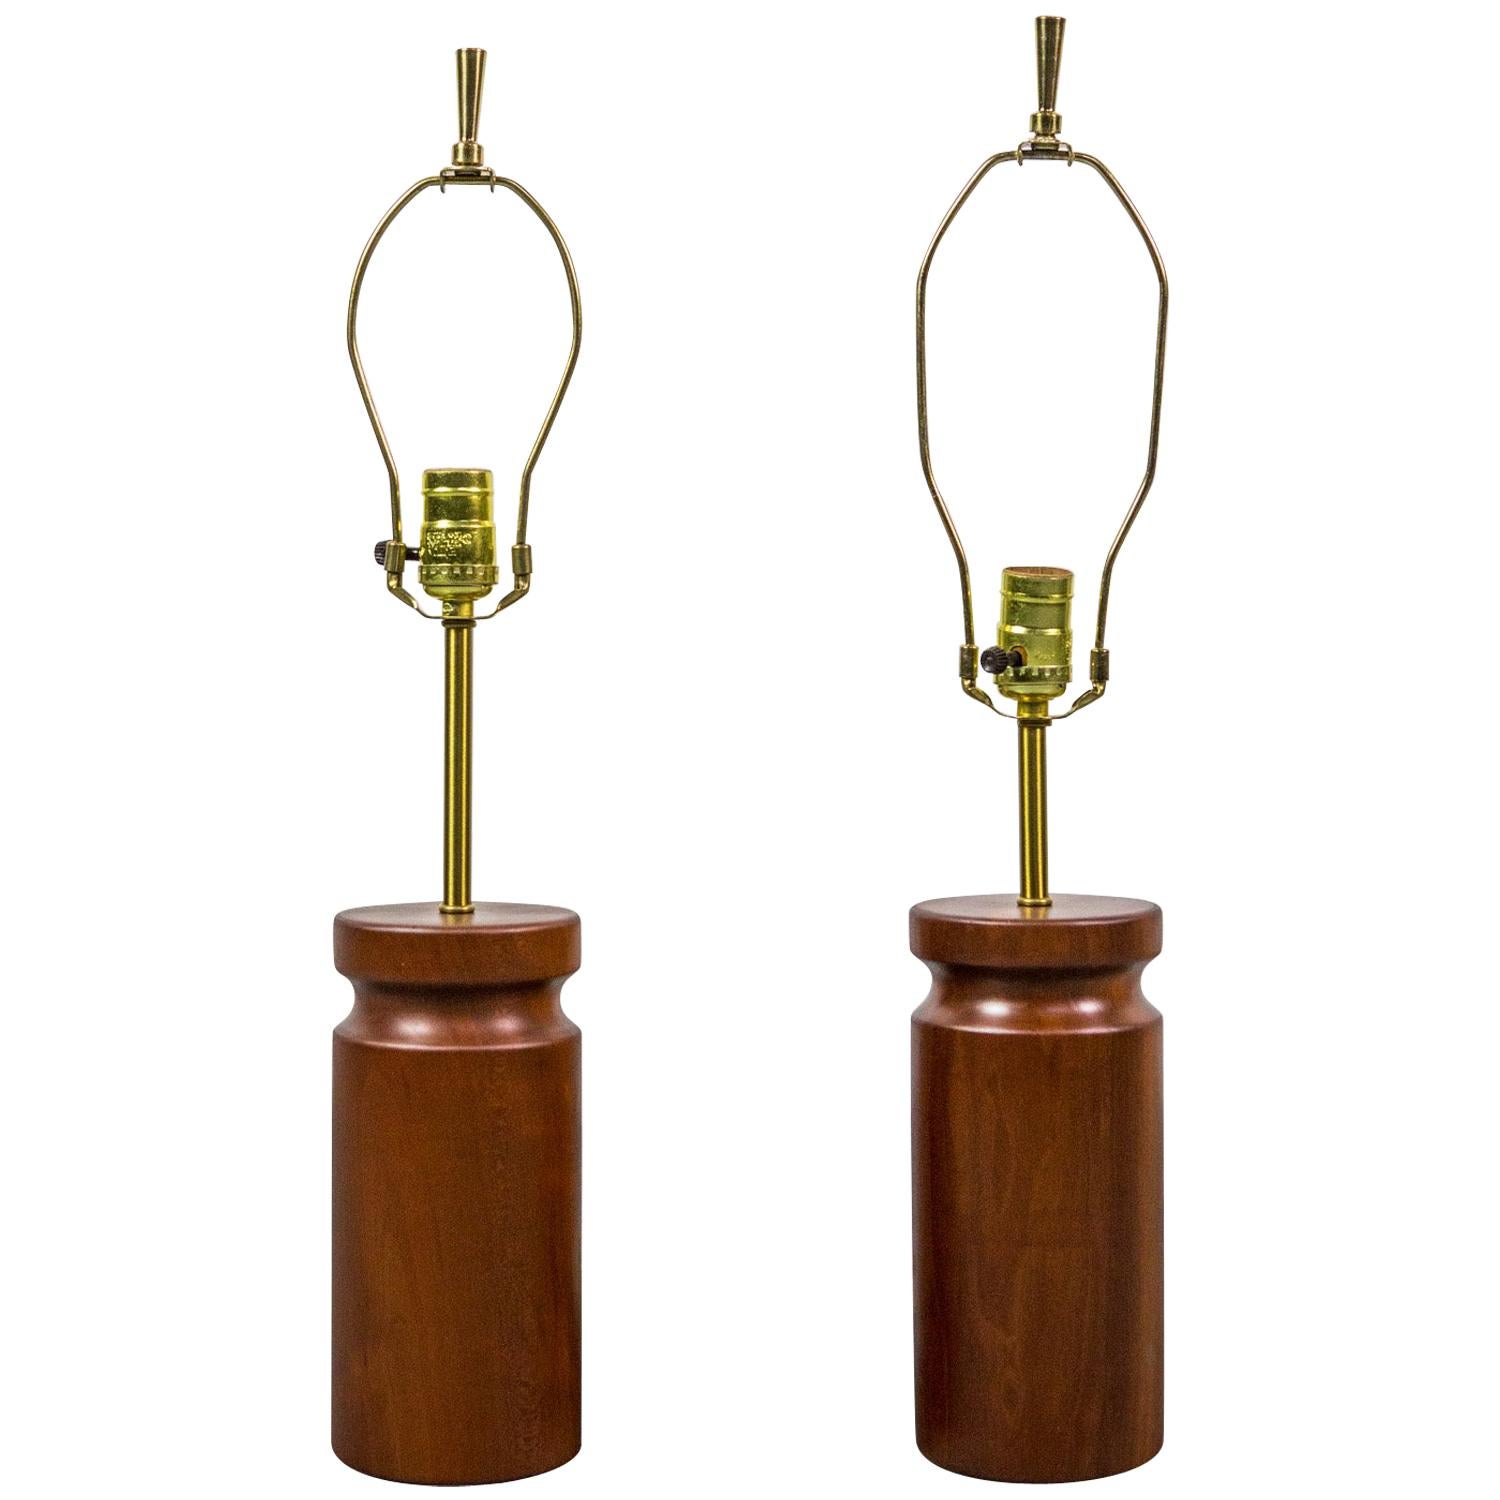 Rare Pair of Table Lamps by Arden Riddle in Cherry